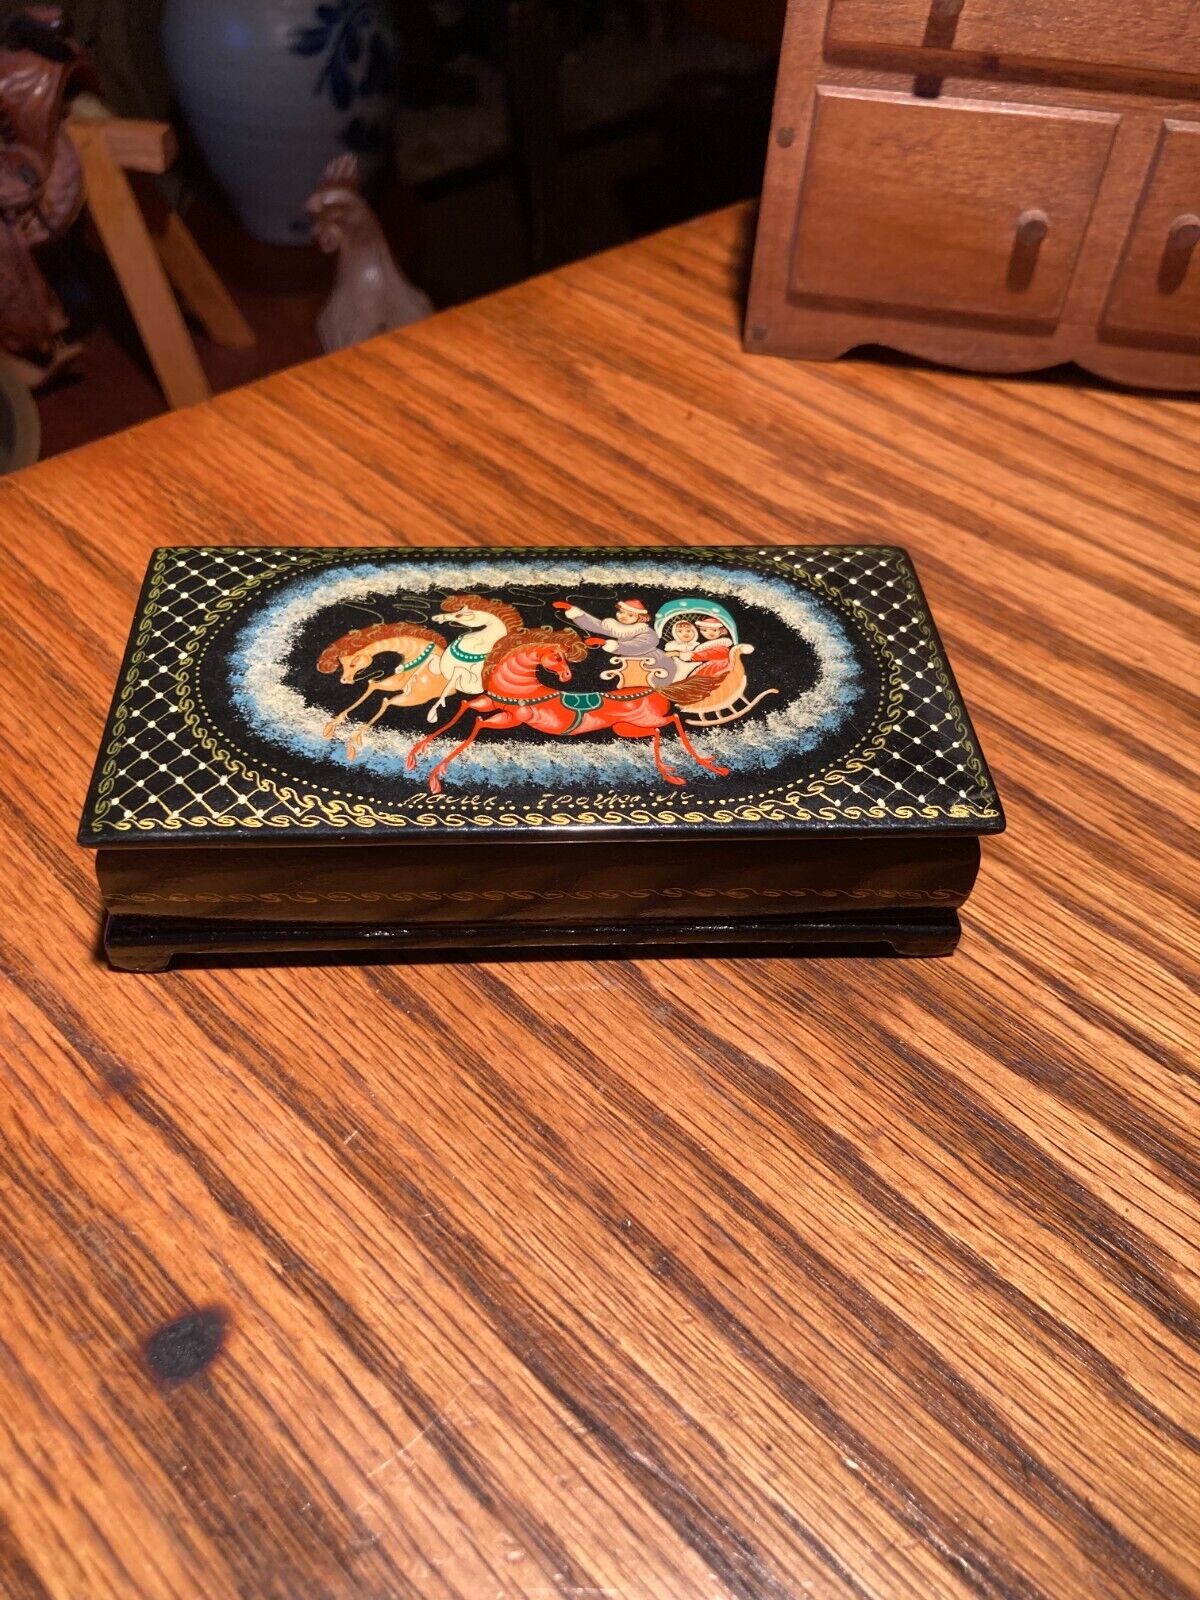 A NICE SMALL RUSSIAN LAQUERE BOX, SIGNED IN RUSSIAN